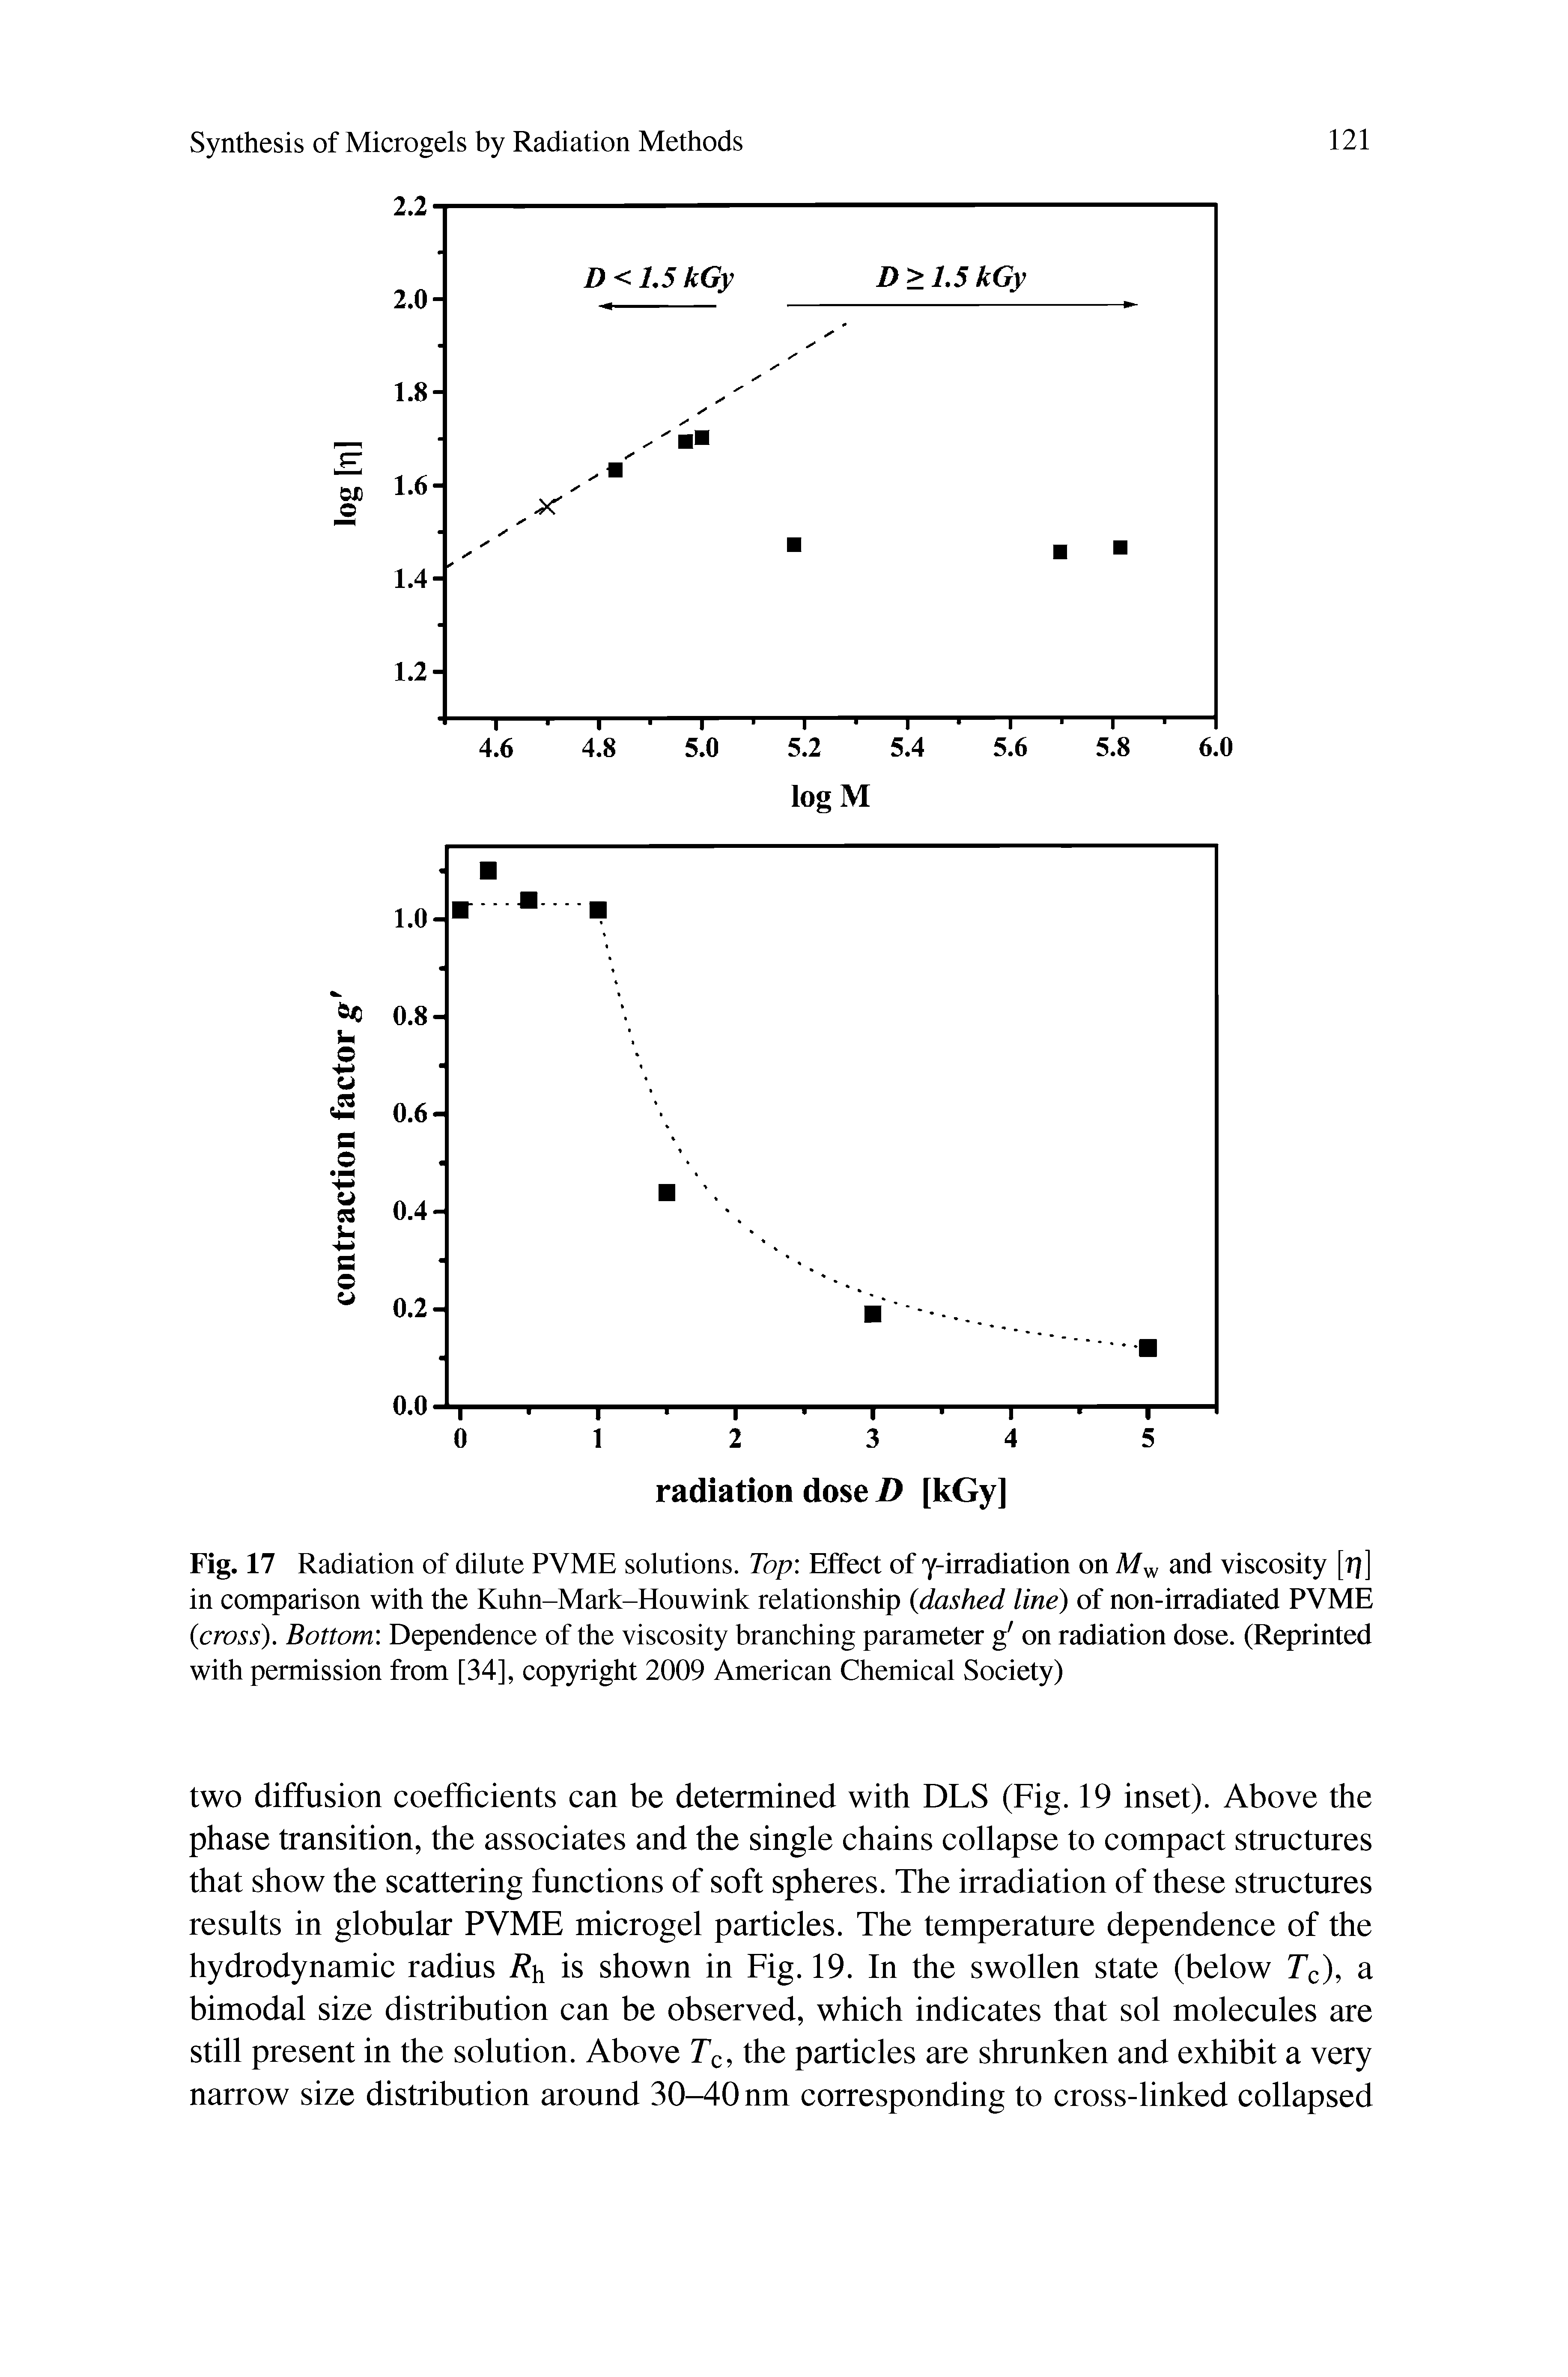 Fig. 17 Radiation of dilute PVME solutions. Top Effect of y-irradiation on Mw and viscosity [77] in comparison with the Kuhn-Mark-Houwink relationship (<dashed line) of non-irradiated PVME (cross). Bottom Dependence of the viscosity branching parameter g on radiation dose. (Reprinted with permission from [34], copyright 2009 American Chemical Society)...